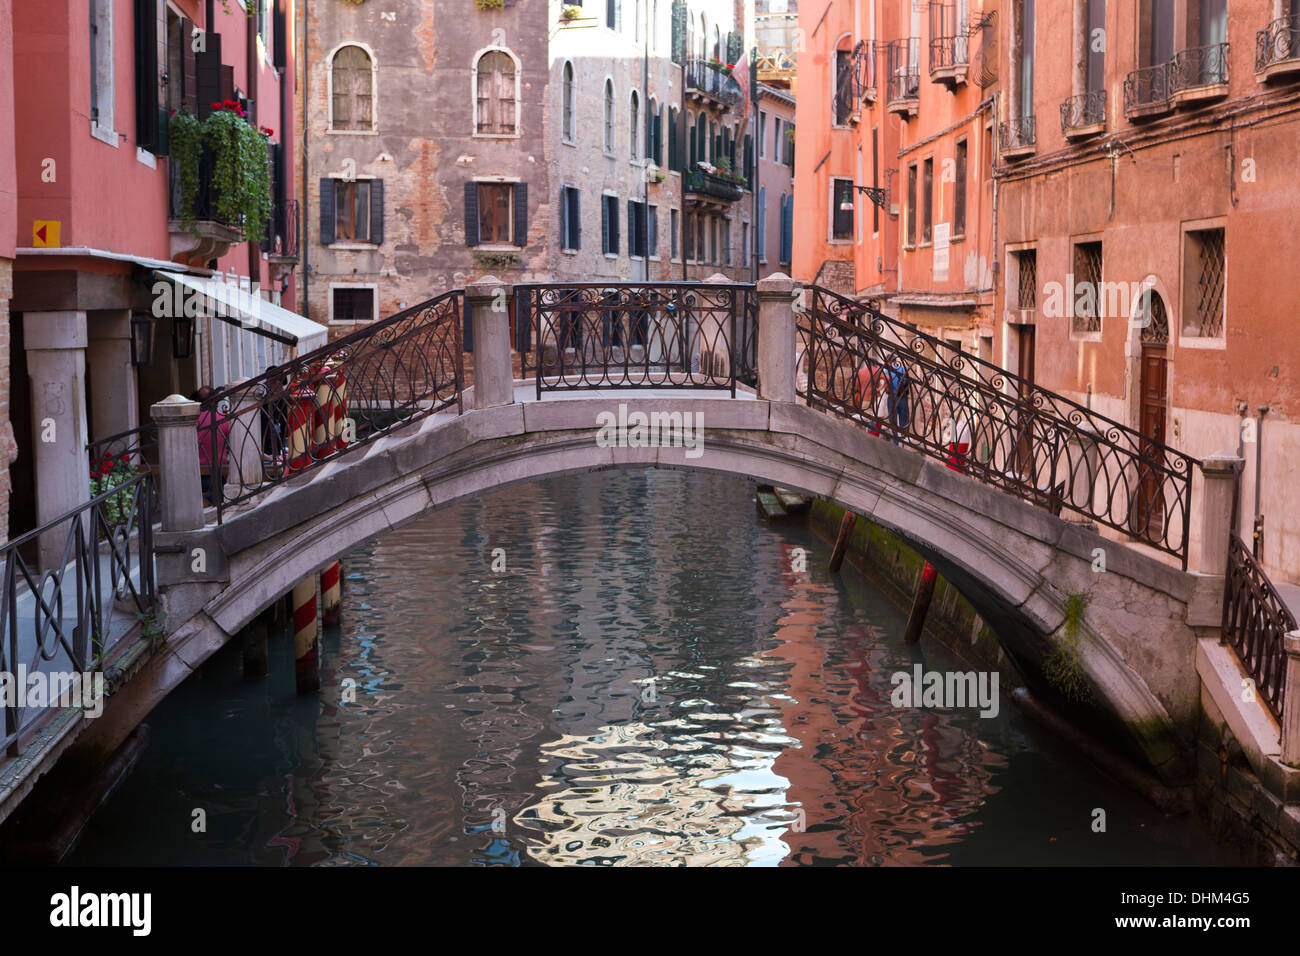 Beautiful little bridge over a small canal lined with colorful buildings in Venice, Italy Stock Photo